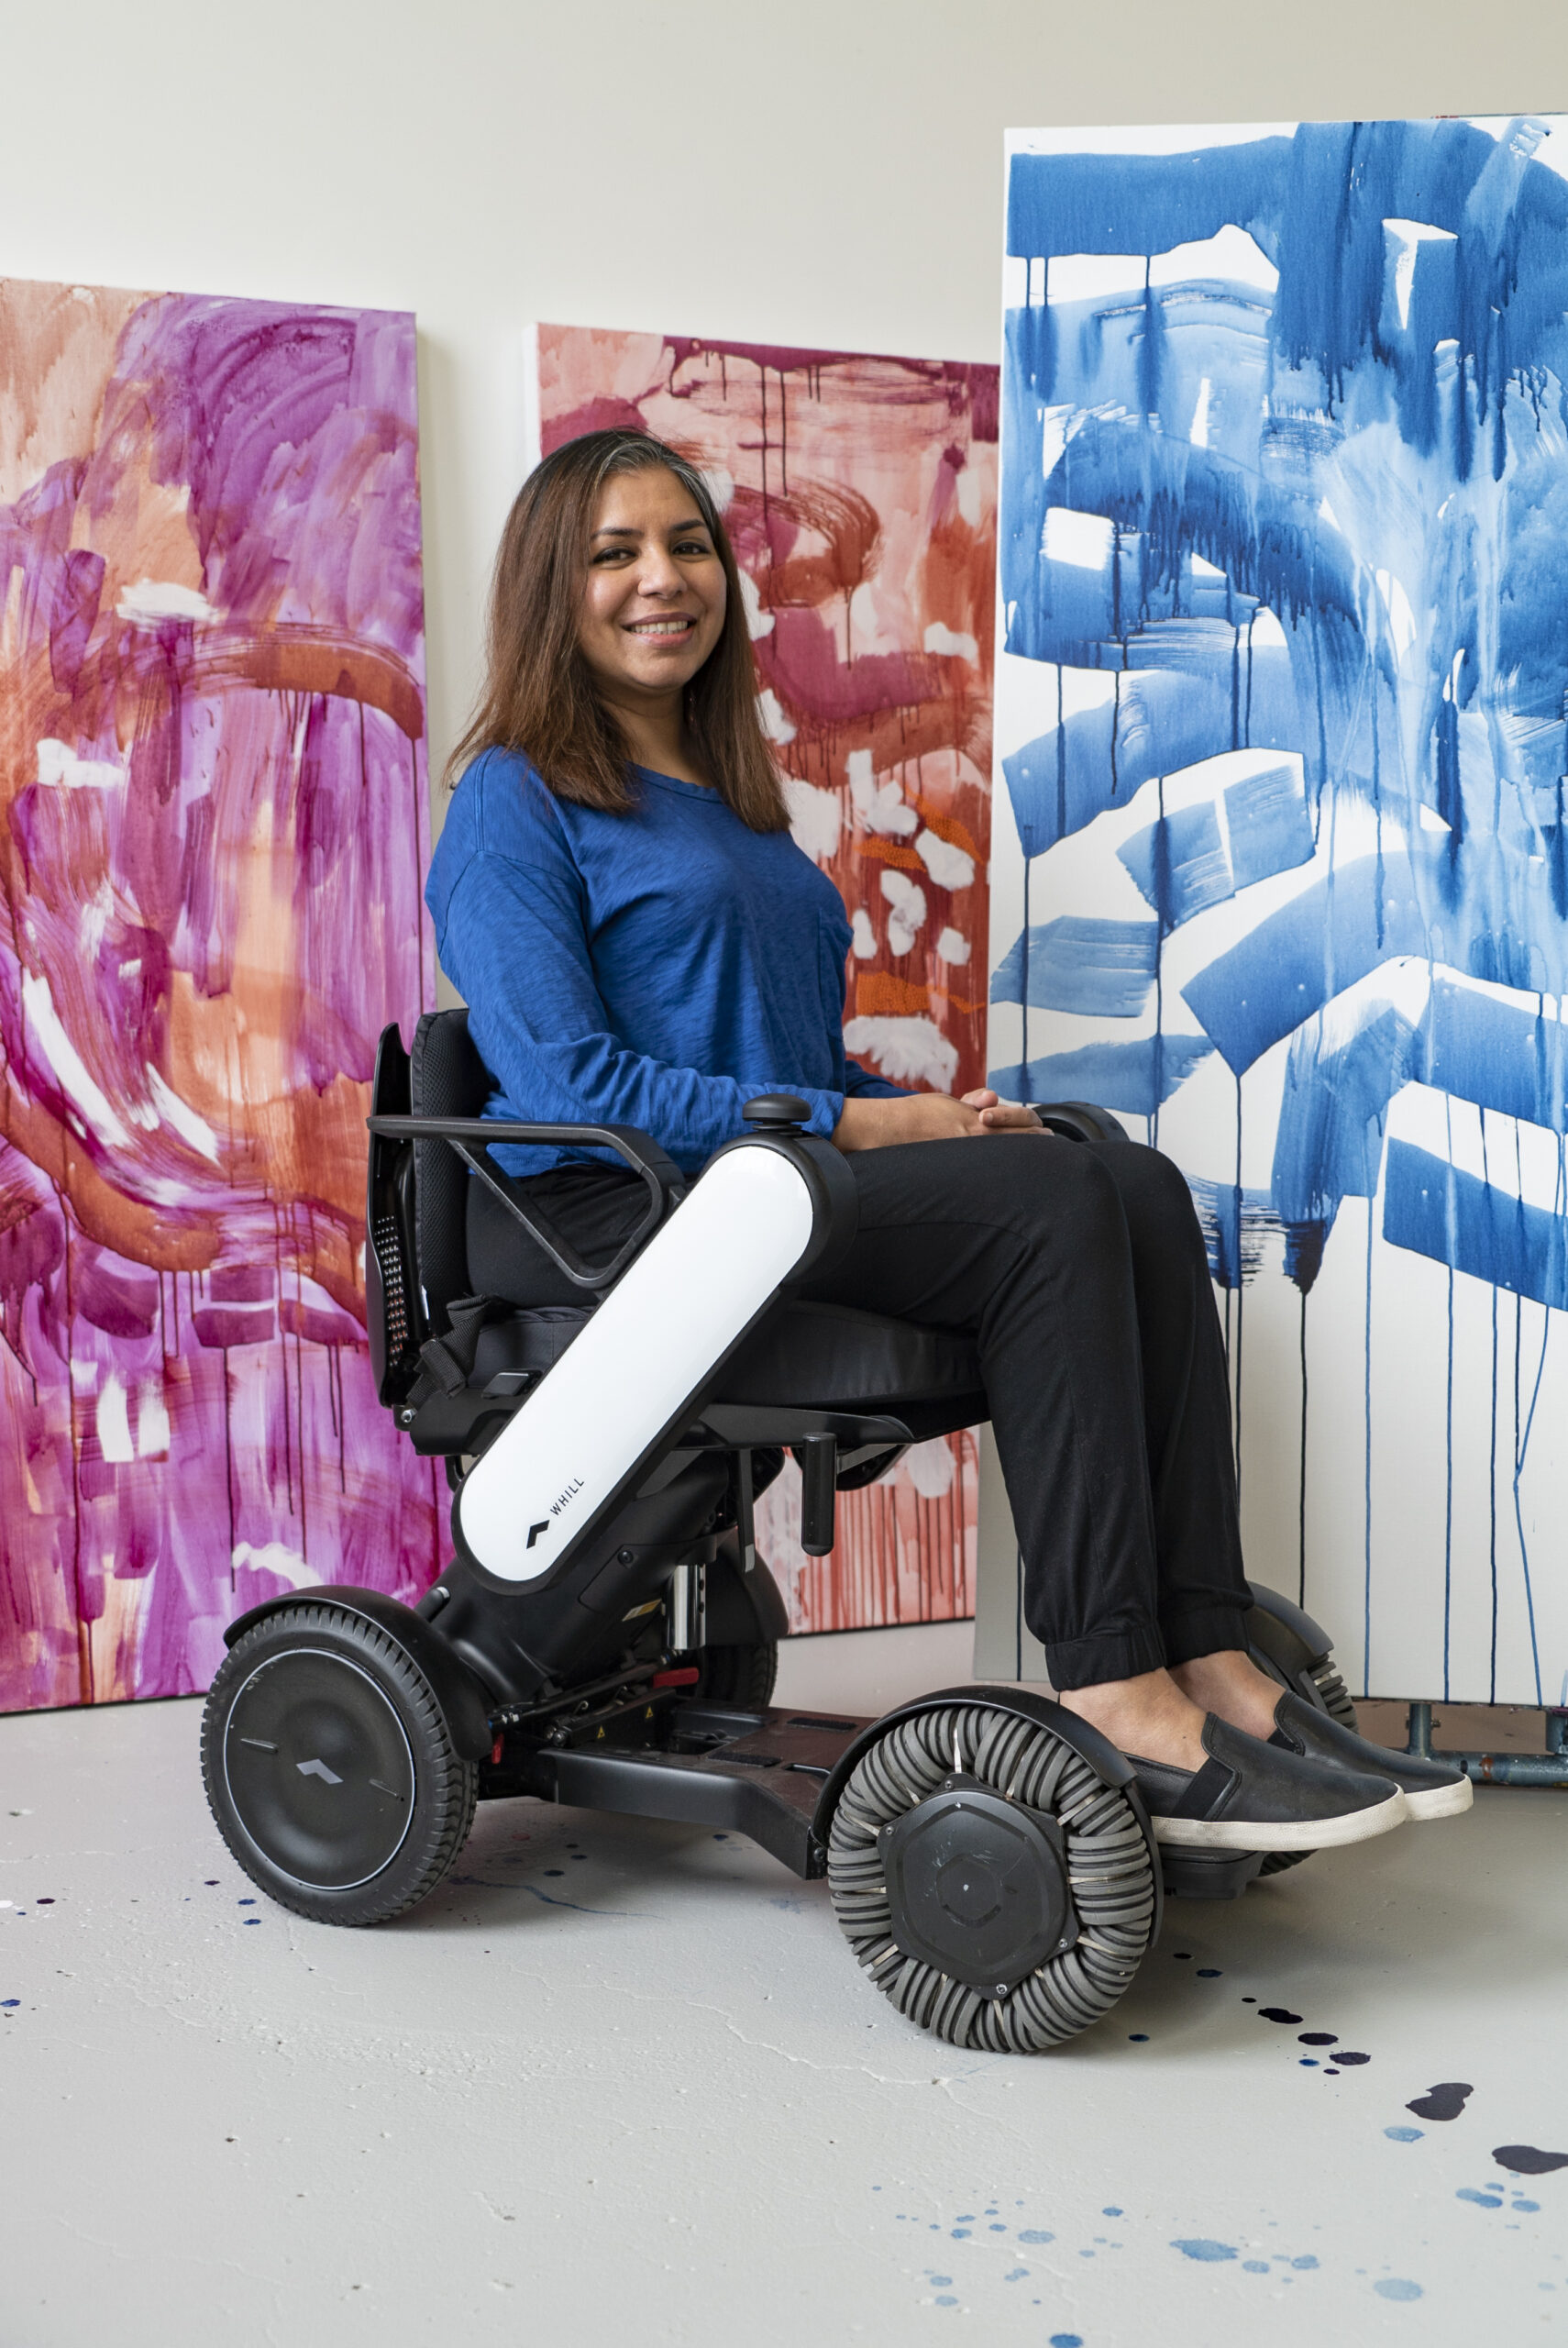 A person of medium skin tone and long brown hair using a wheelchair smiles and poses in front of large colorful paintings. They are wearing a blue long-sleeve shirt, black pants, and black slip-on shoes.